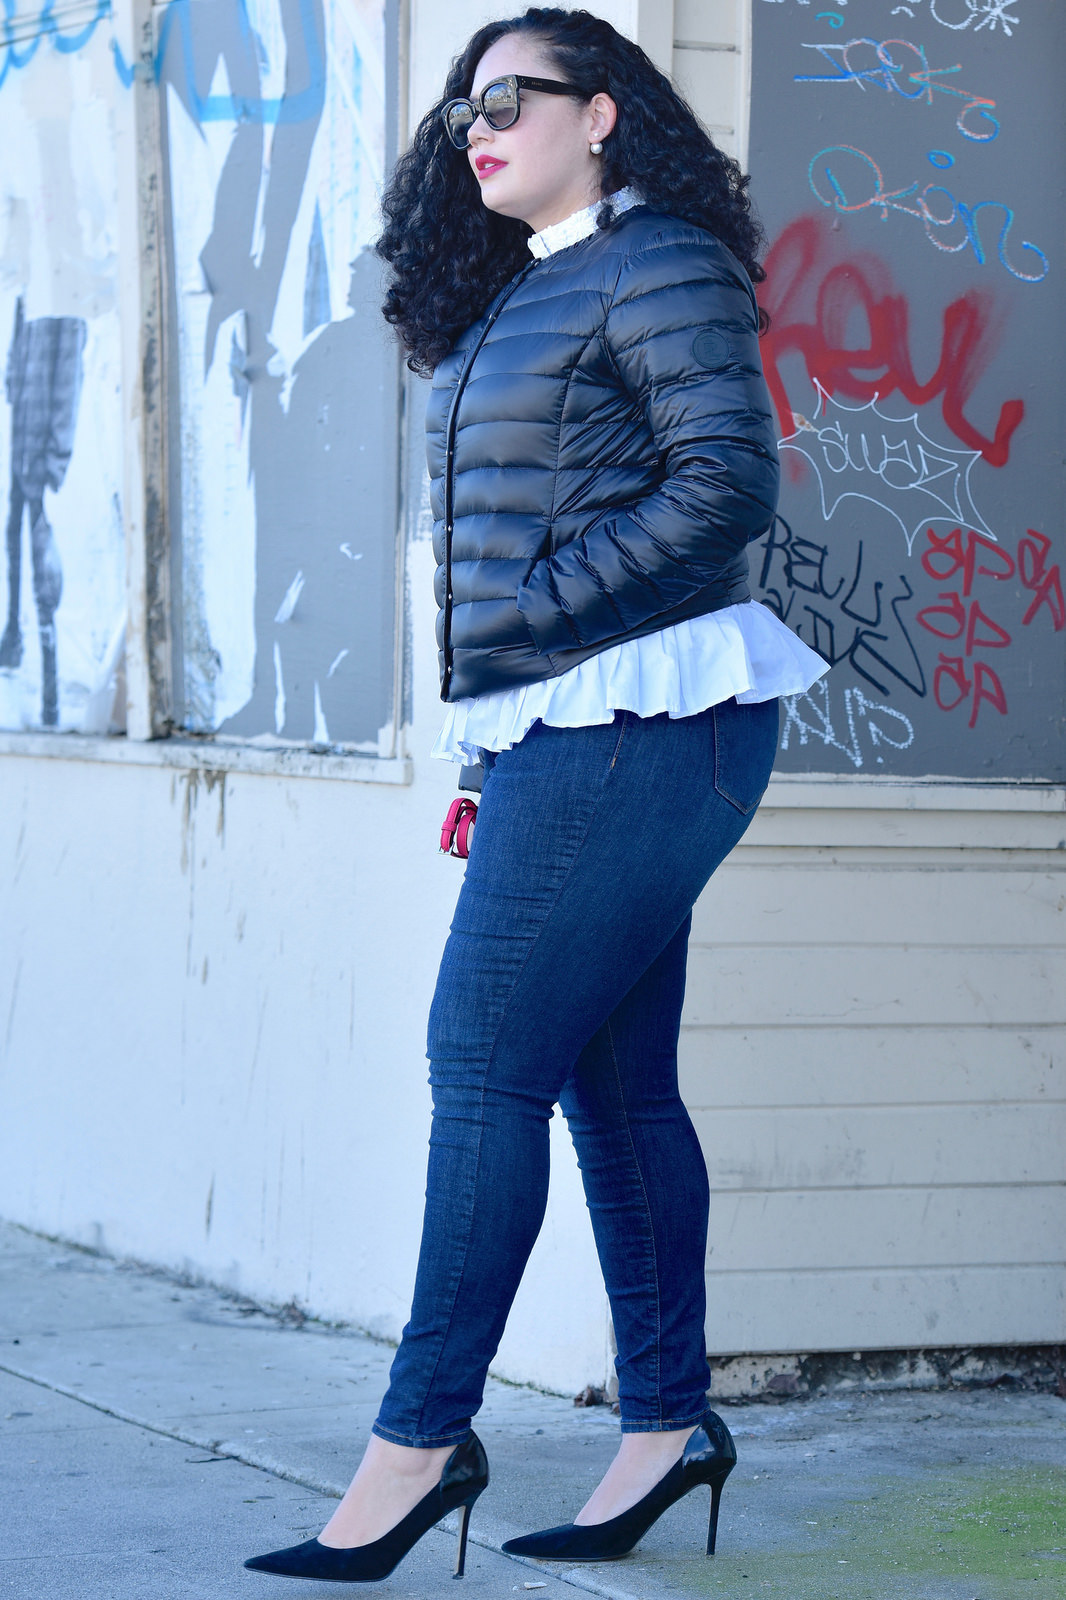 Featuring a puffer jacket from Ralph Lauren, Top from Eloquii, Rockstar Jeans from Old Navy, bag from Kate Spade, Lipstick from Mac, and shoes from Enzo Angiolini